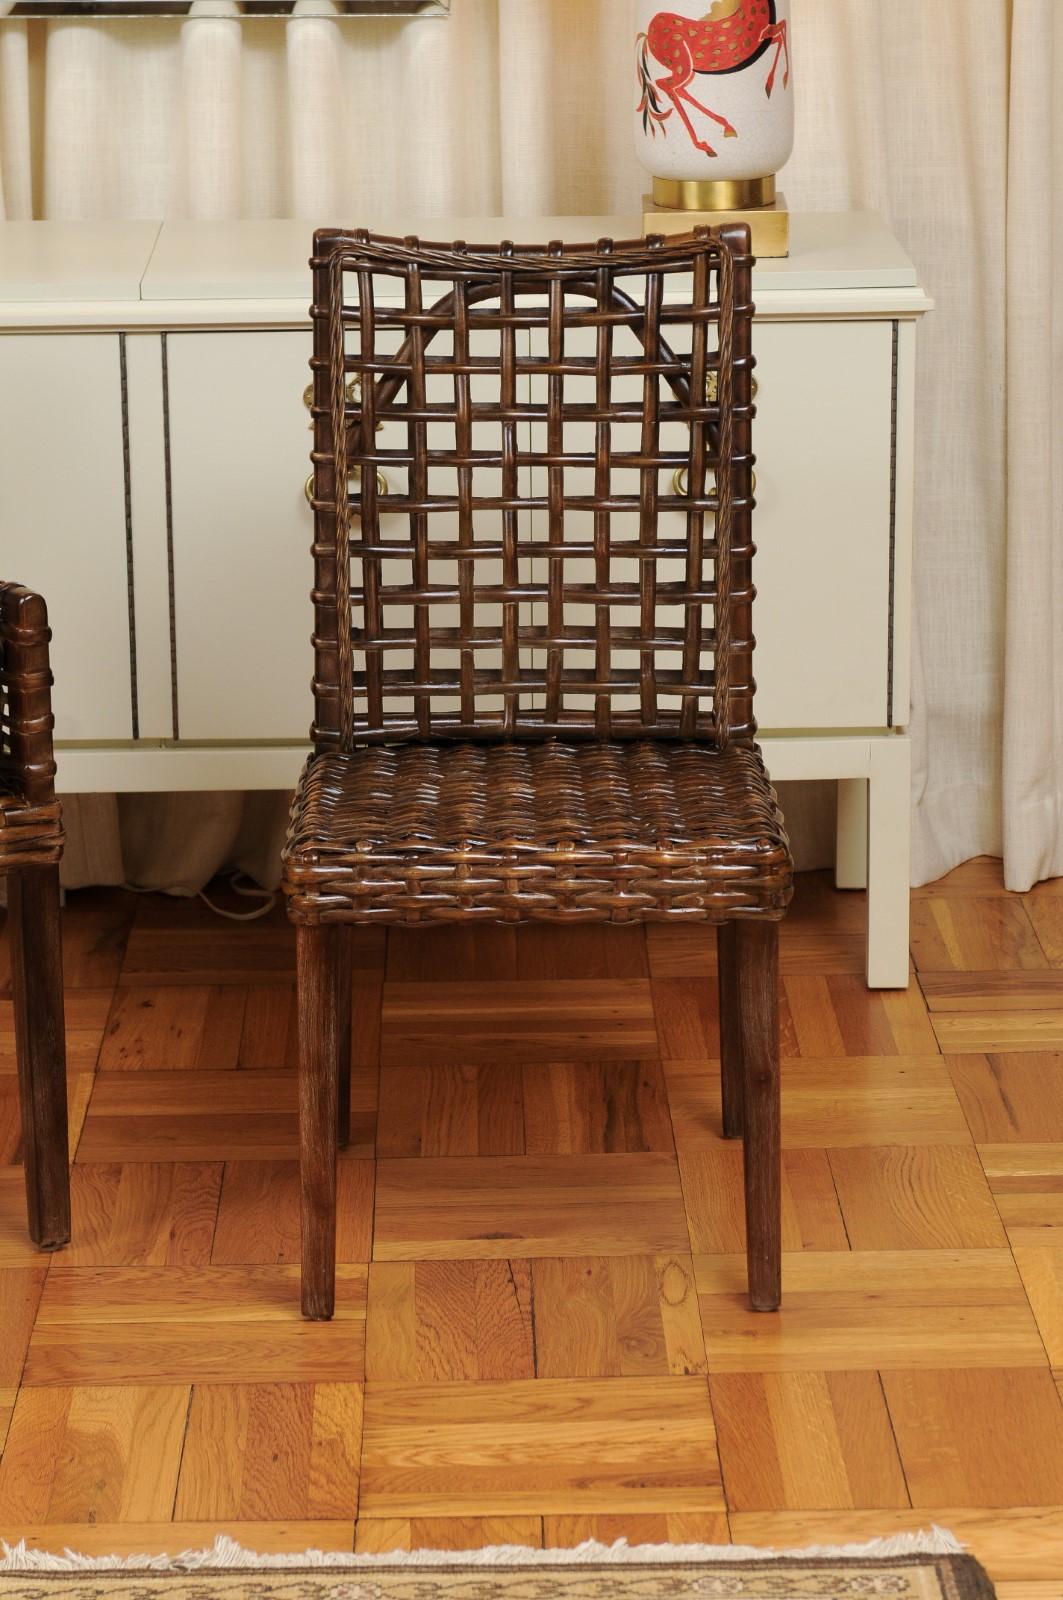 Superb Set of 12 Cerused Mahogany and Cane Dining Chairs in Aged Tobacco In Excellent Condition For Sale In Atlanta, GA